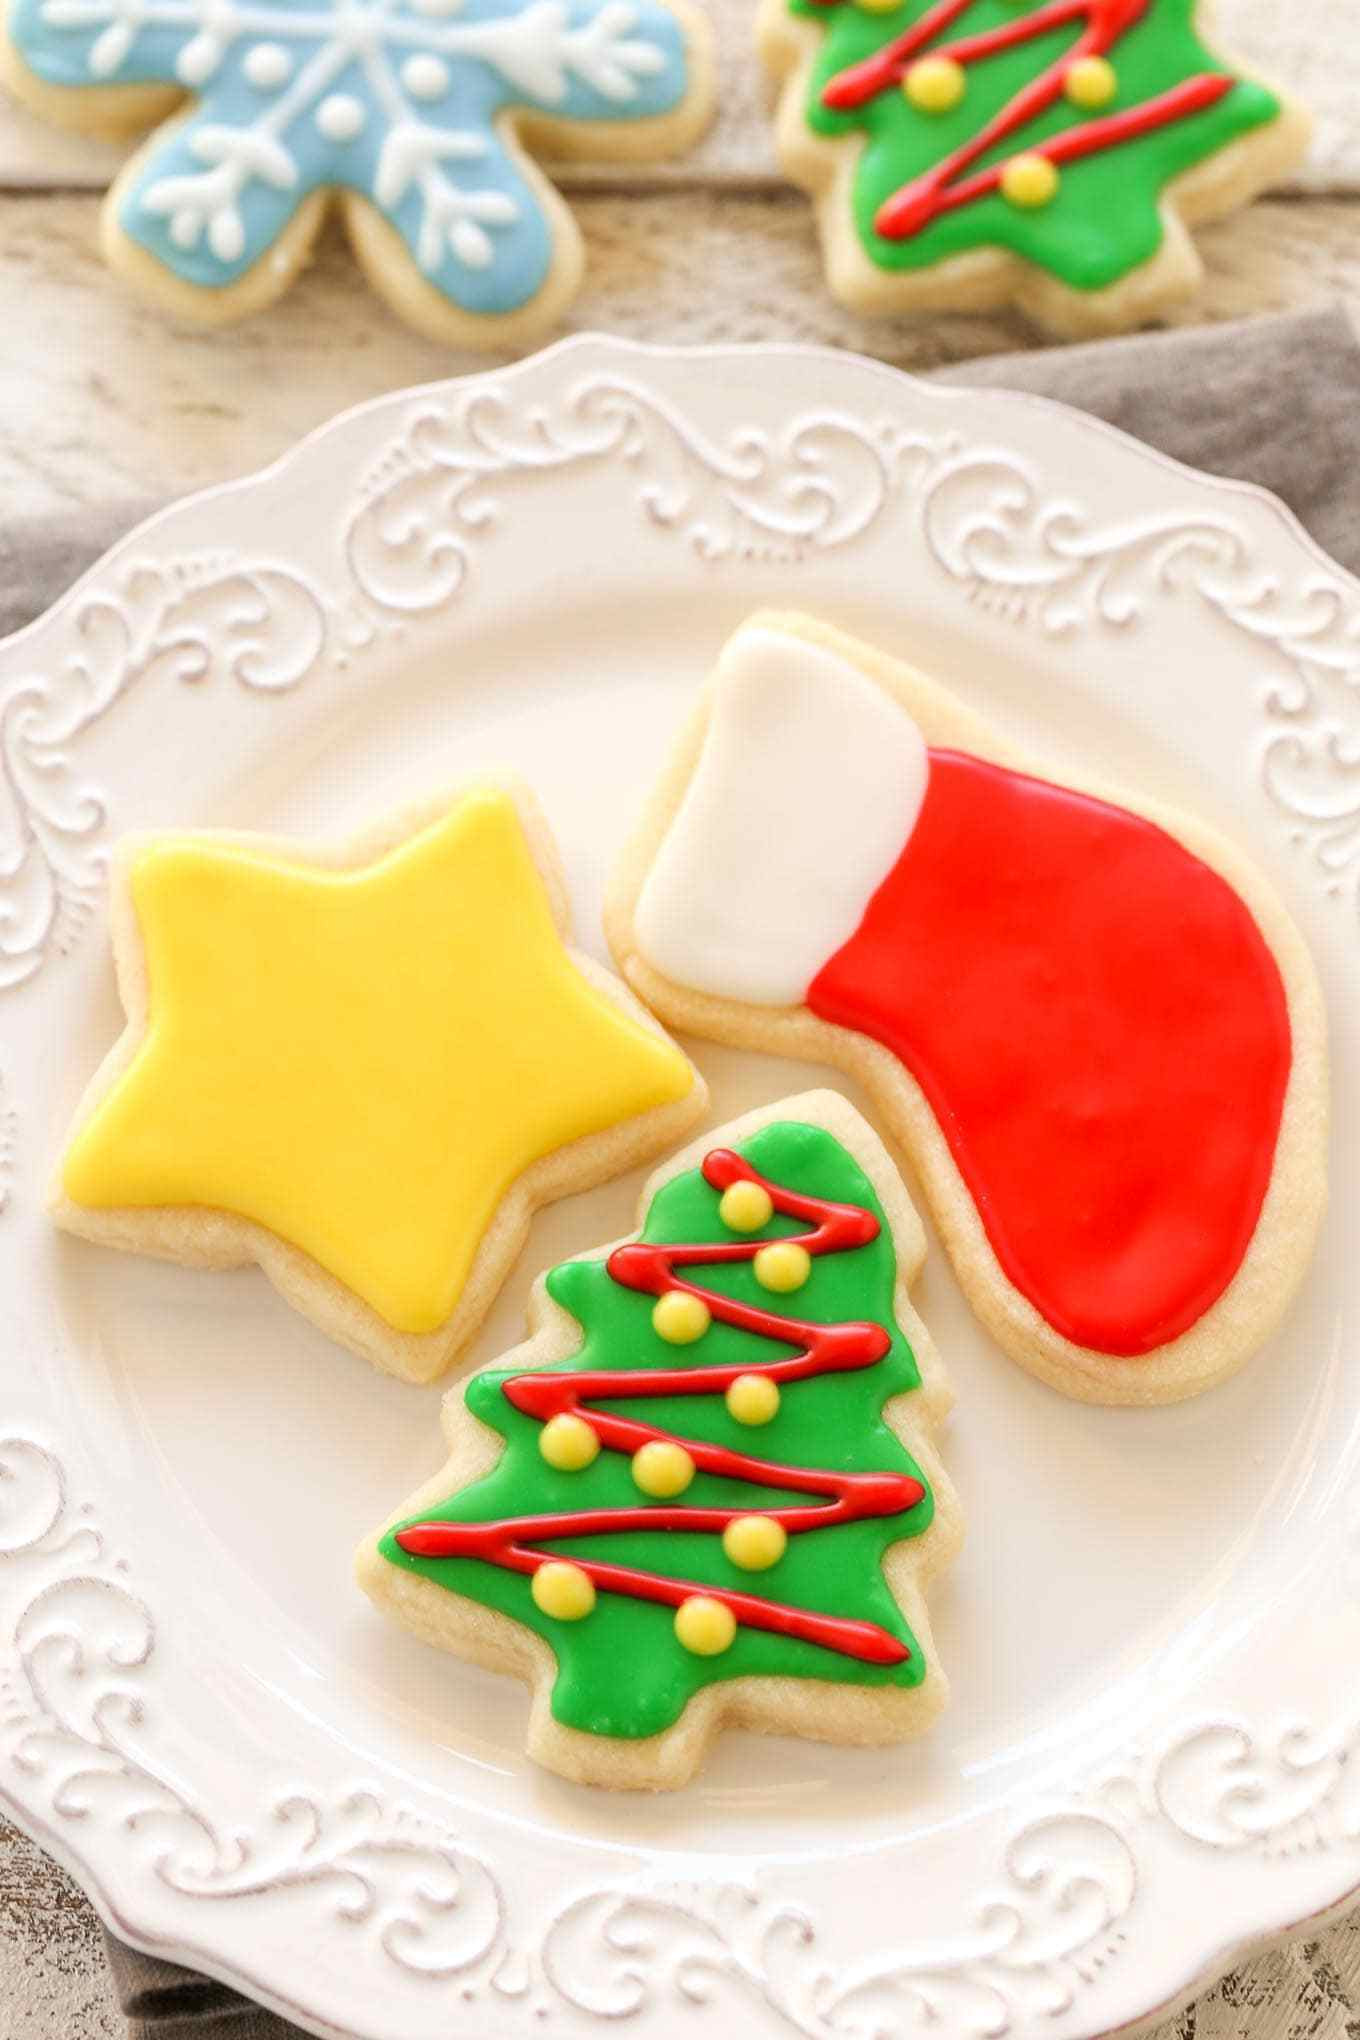 Christmas Sugar Cookie Icing Recipe
 Soft Christmas Cut Out Sugar Cookies Live Well Bake ten